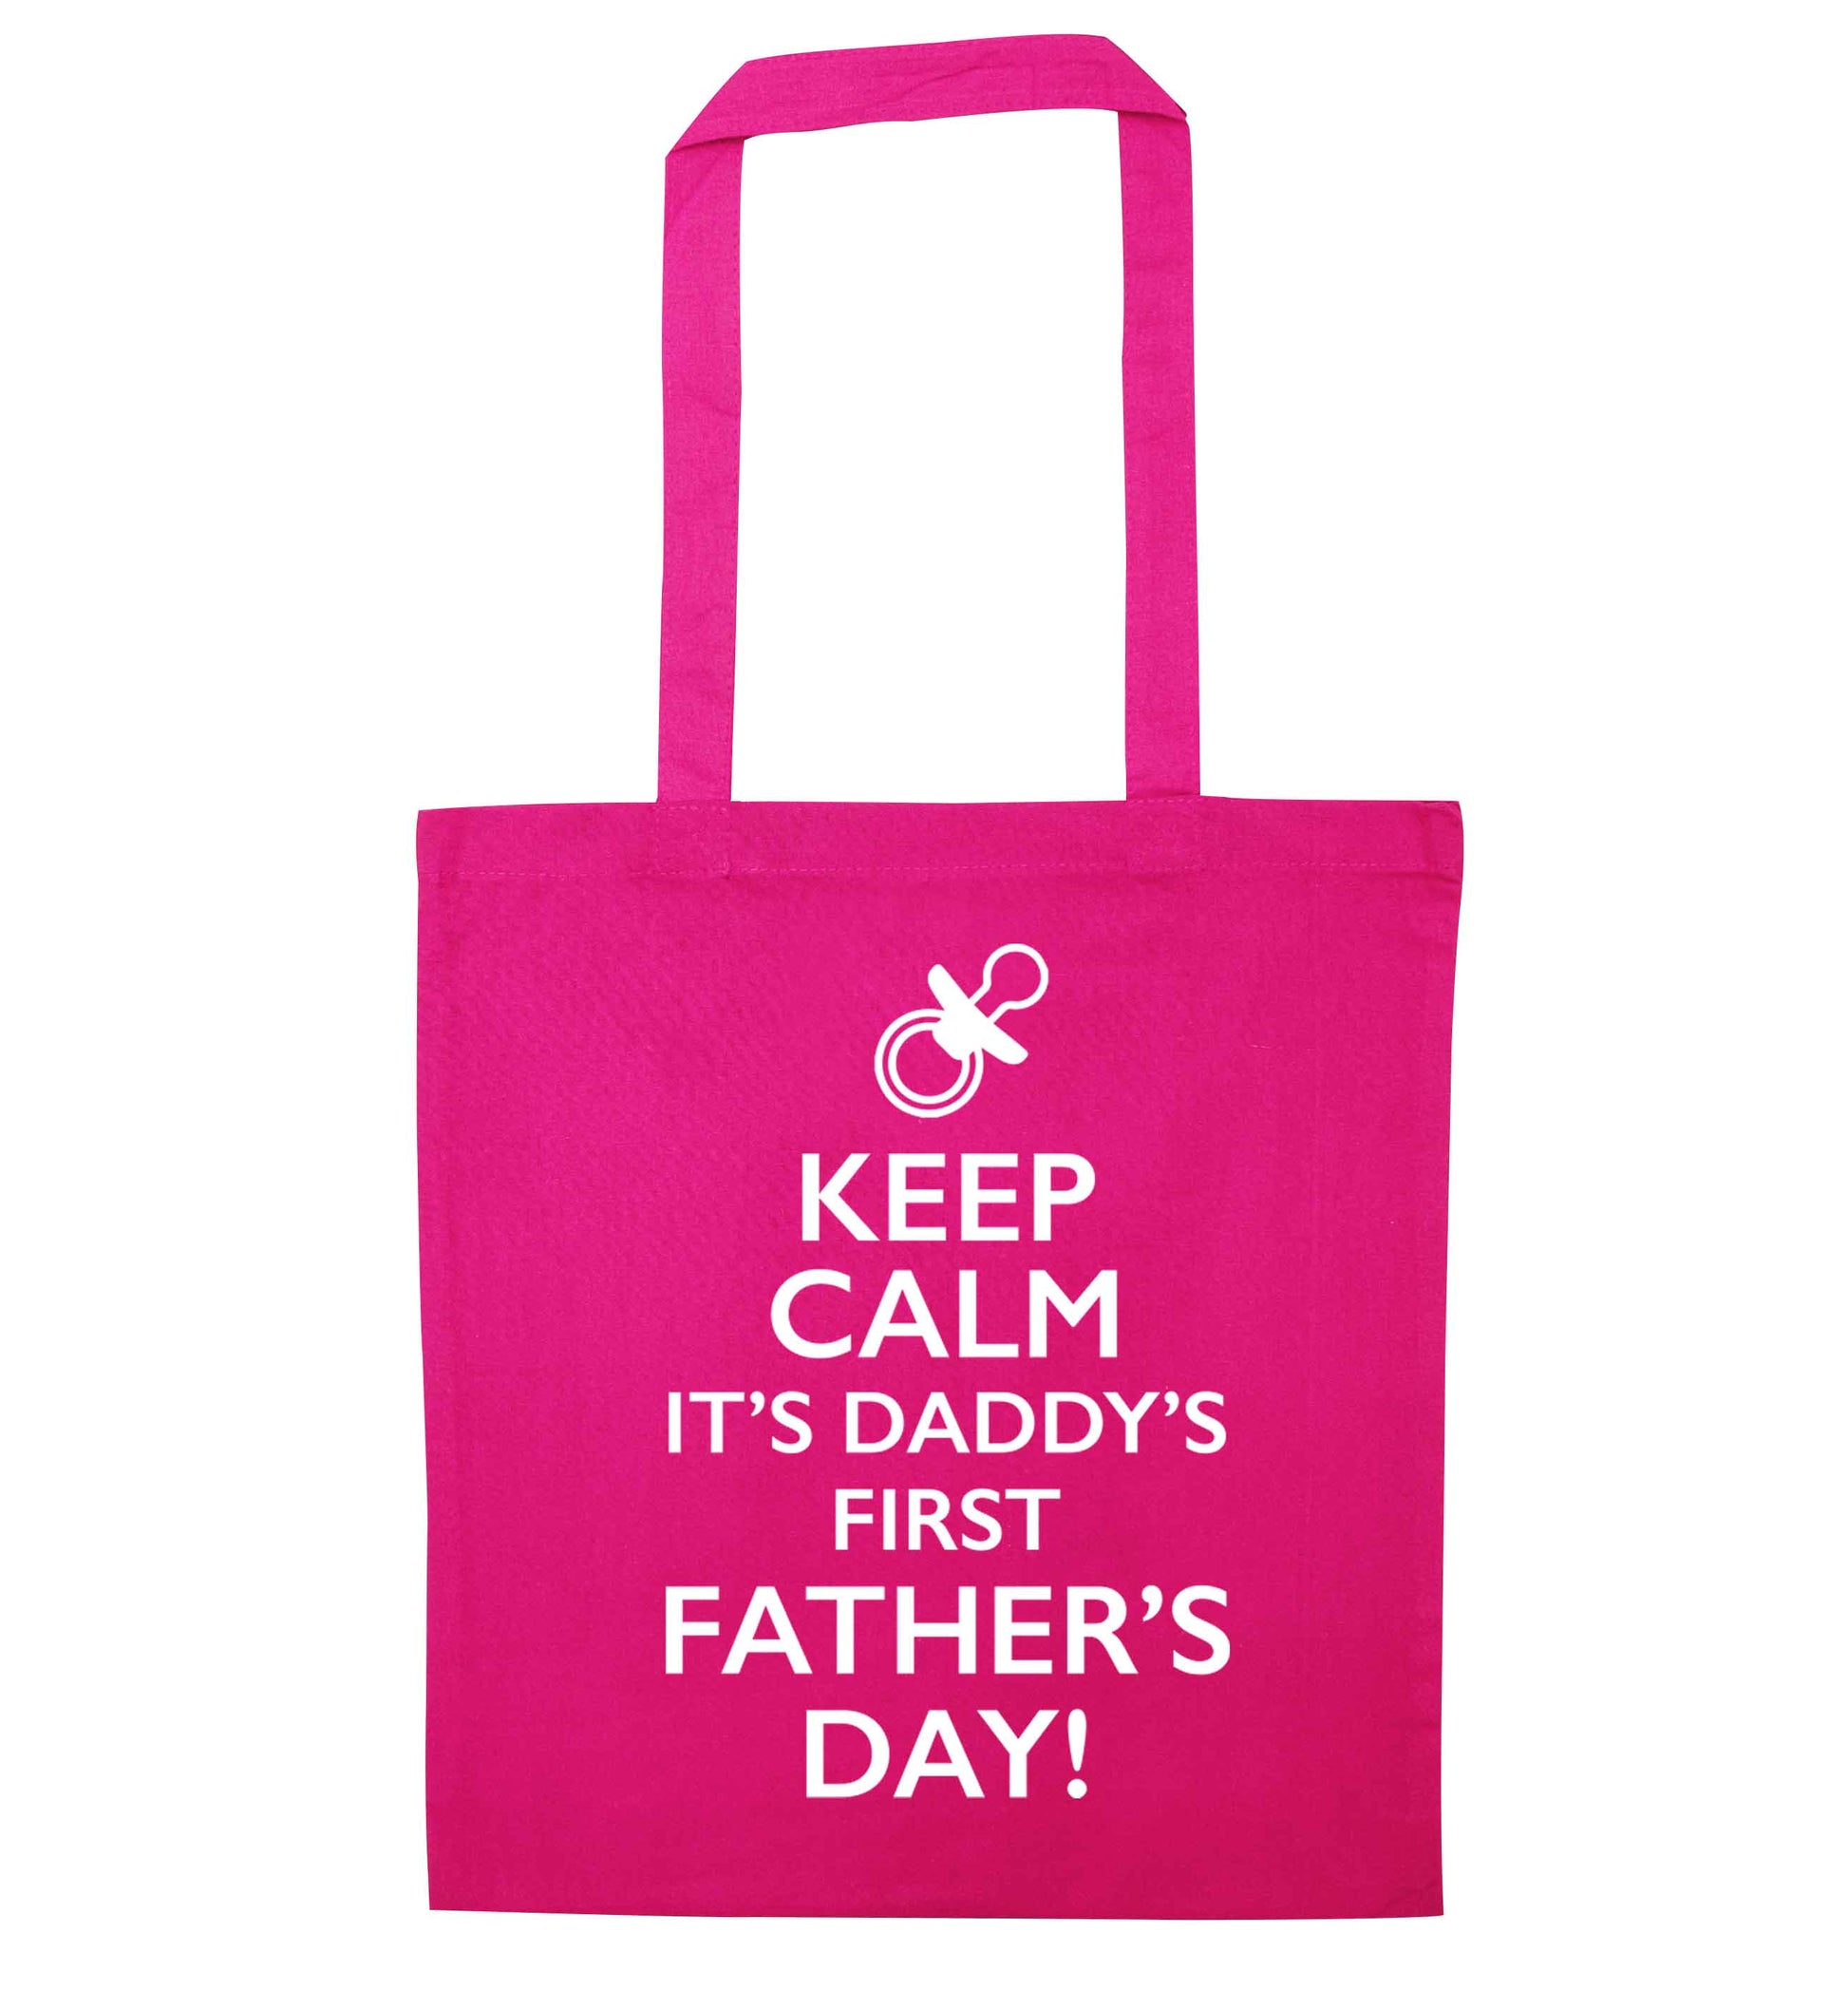 Keep calm it's daddys first father's day pink tote bag